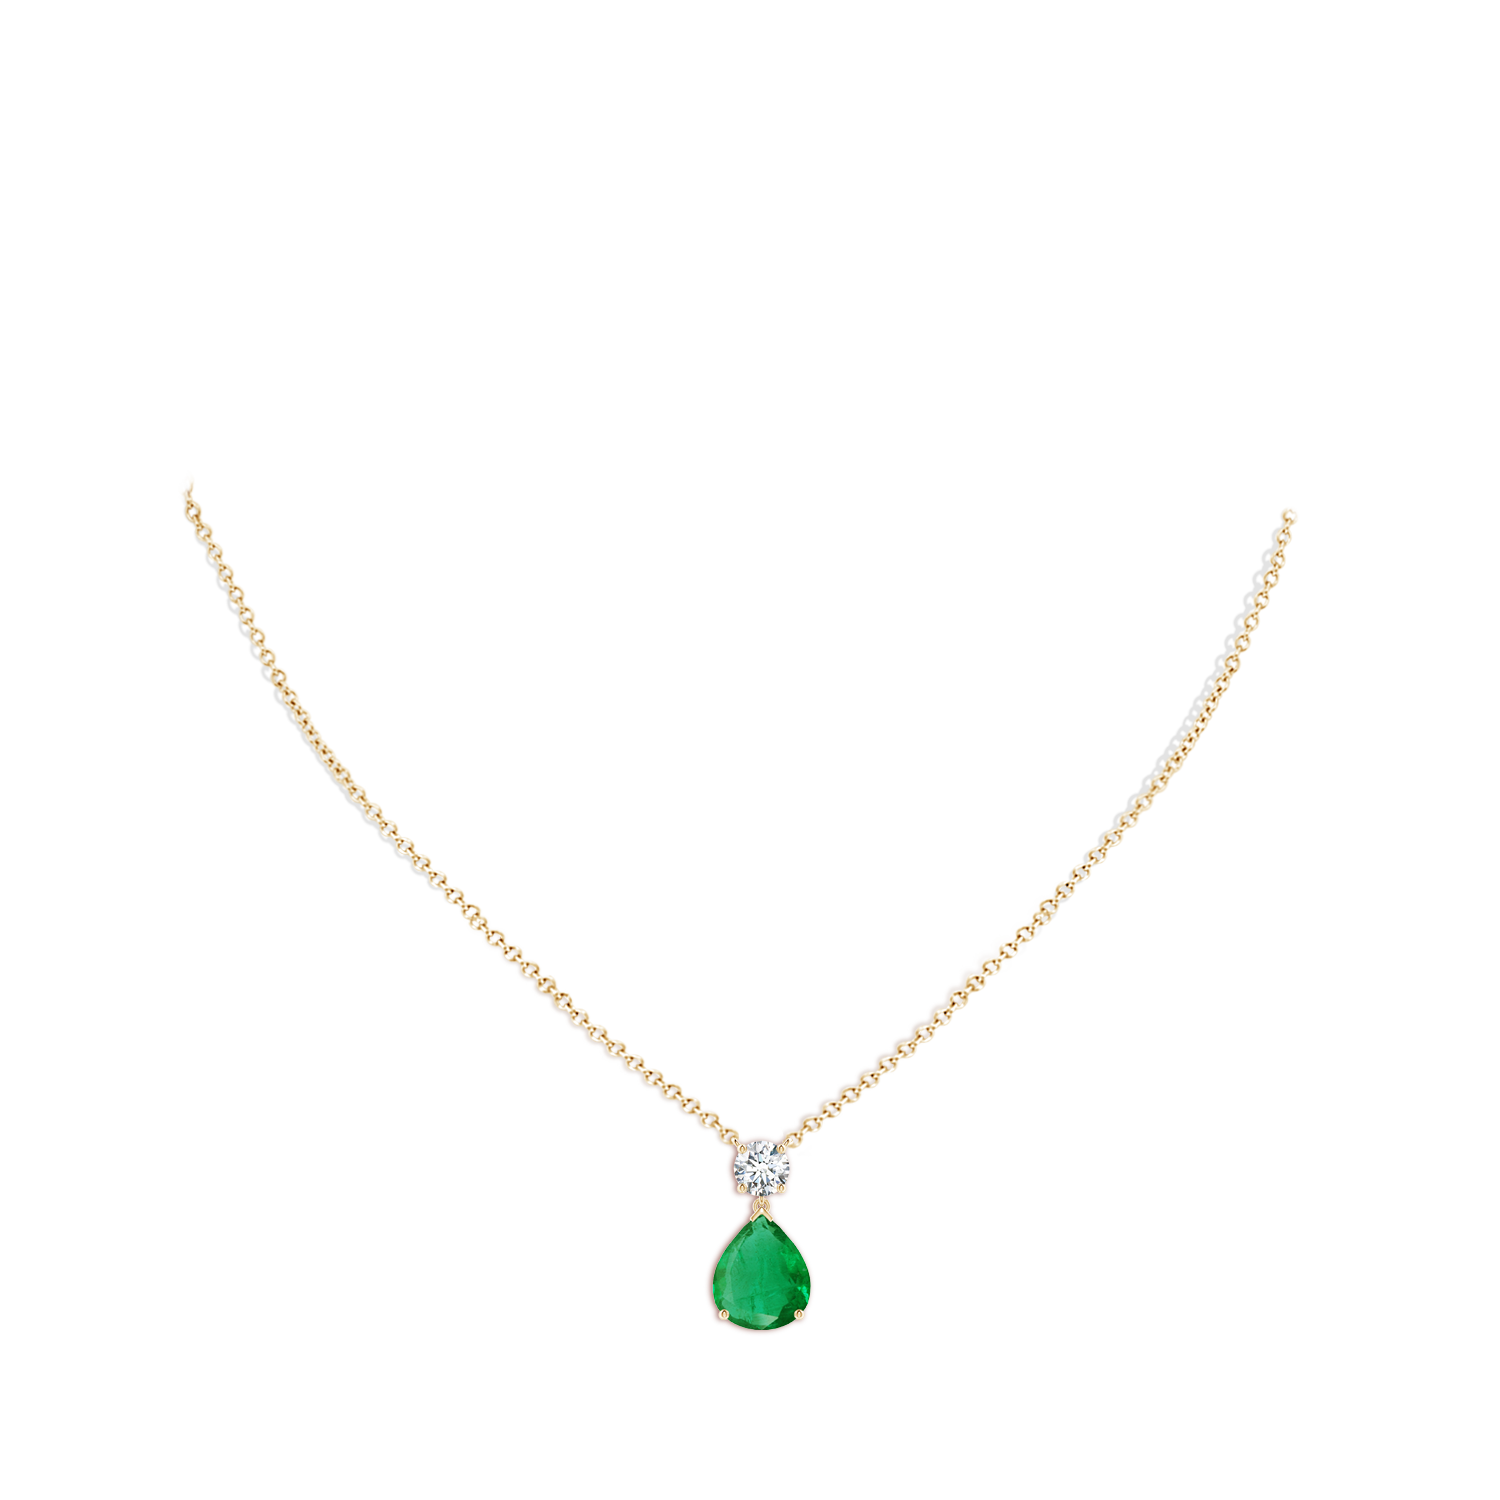 AA - Emerald / 5.21 CT / 18 KT Yellow Gold